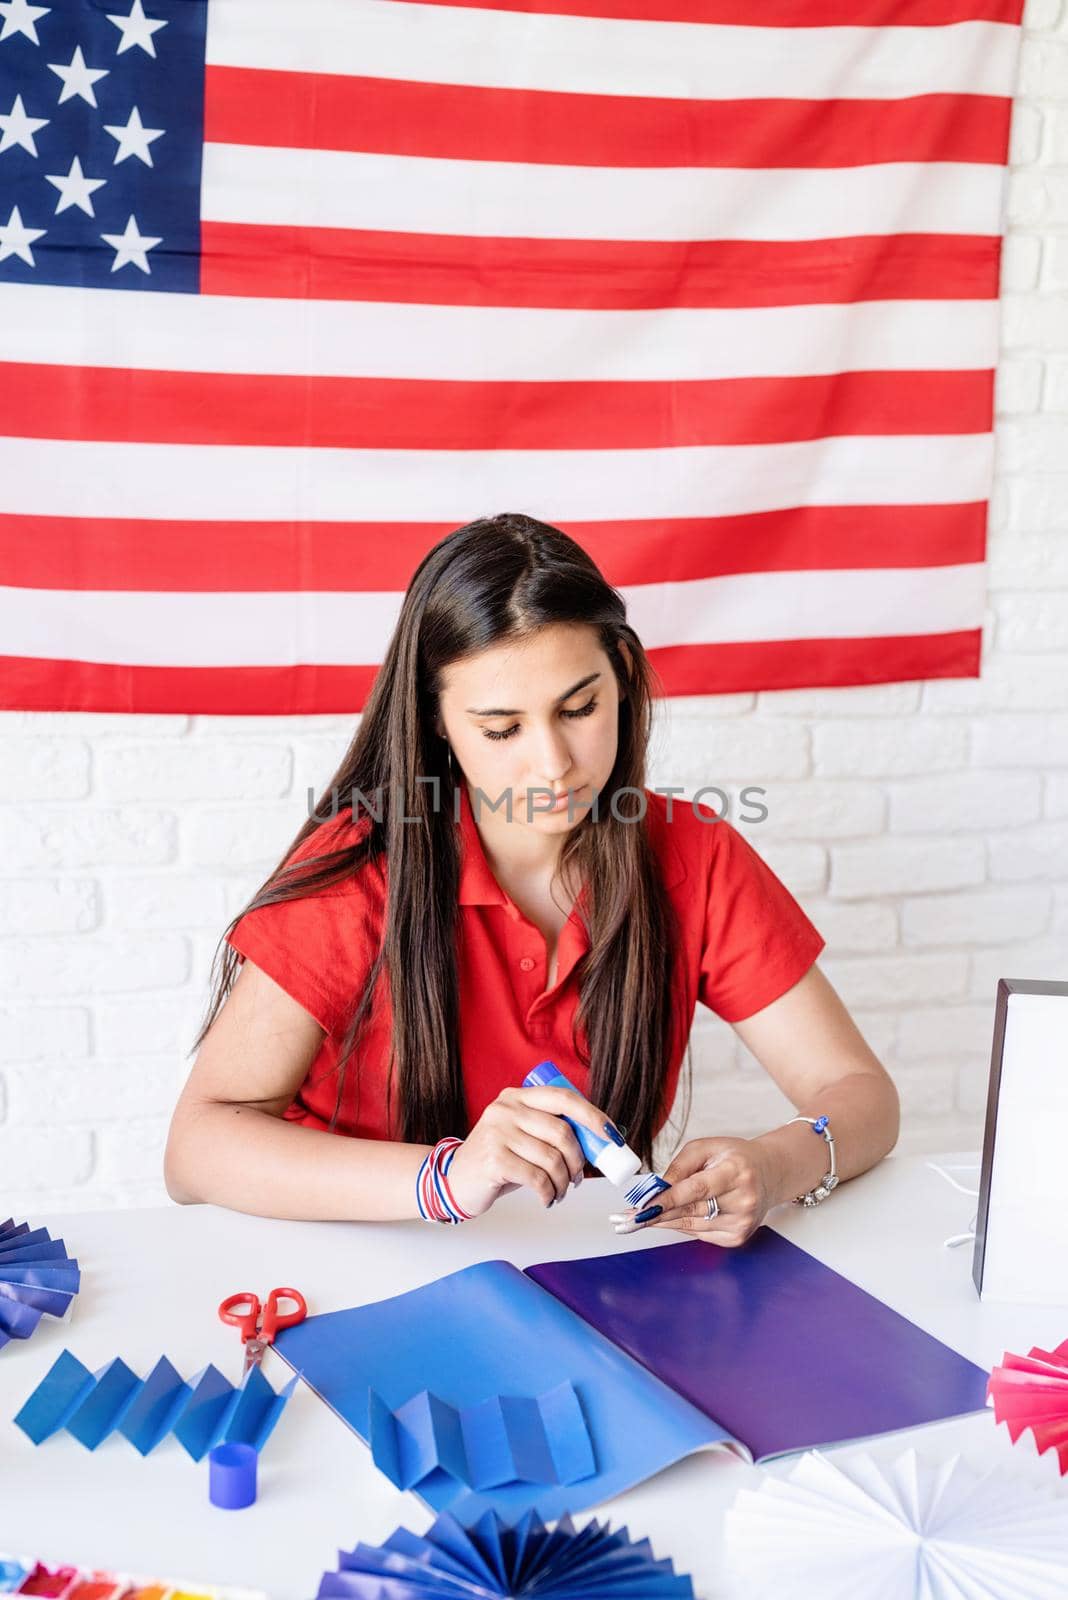 Independence day of the USA. Happy July 4th. Beautiful woman making DIY paper fans of red and blue colors to celebrate July 4th